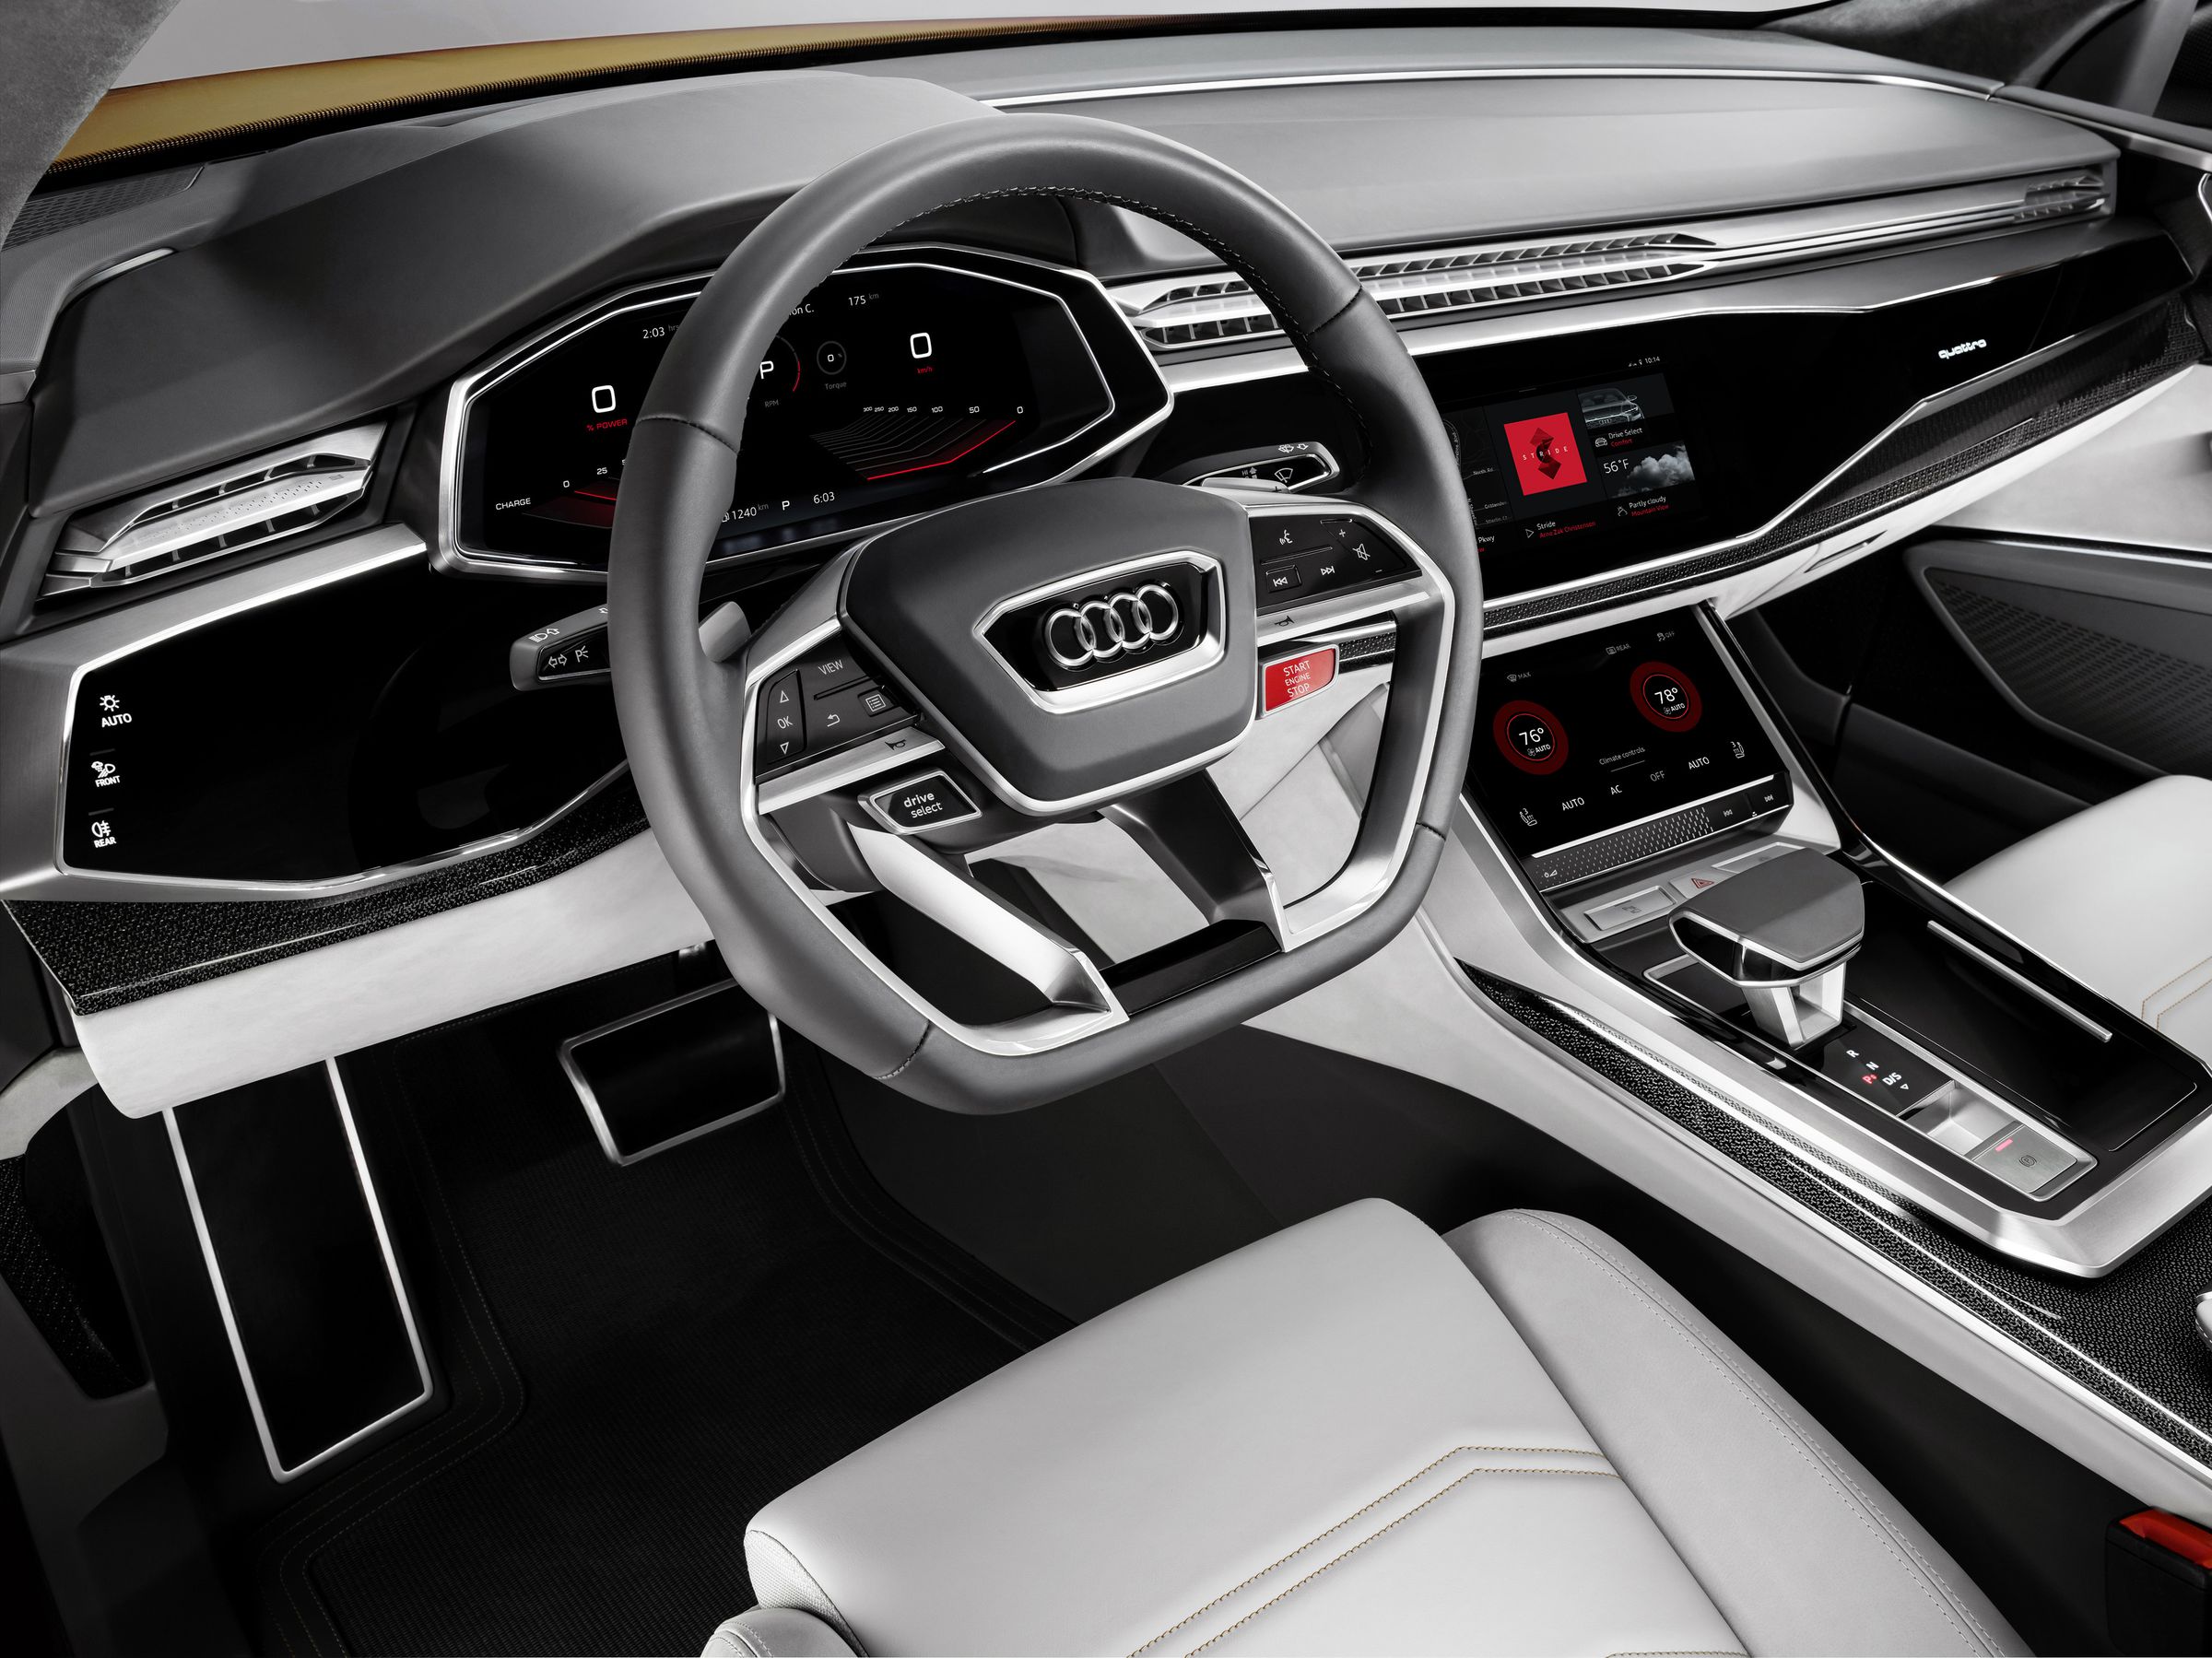 The Q8 Sport Concept running Audi’s new Android-powered infotainment system